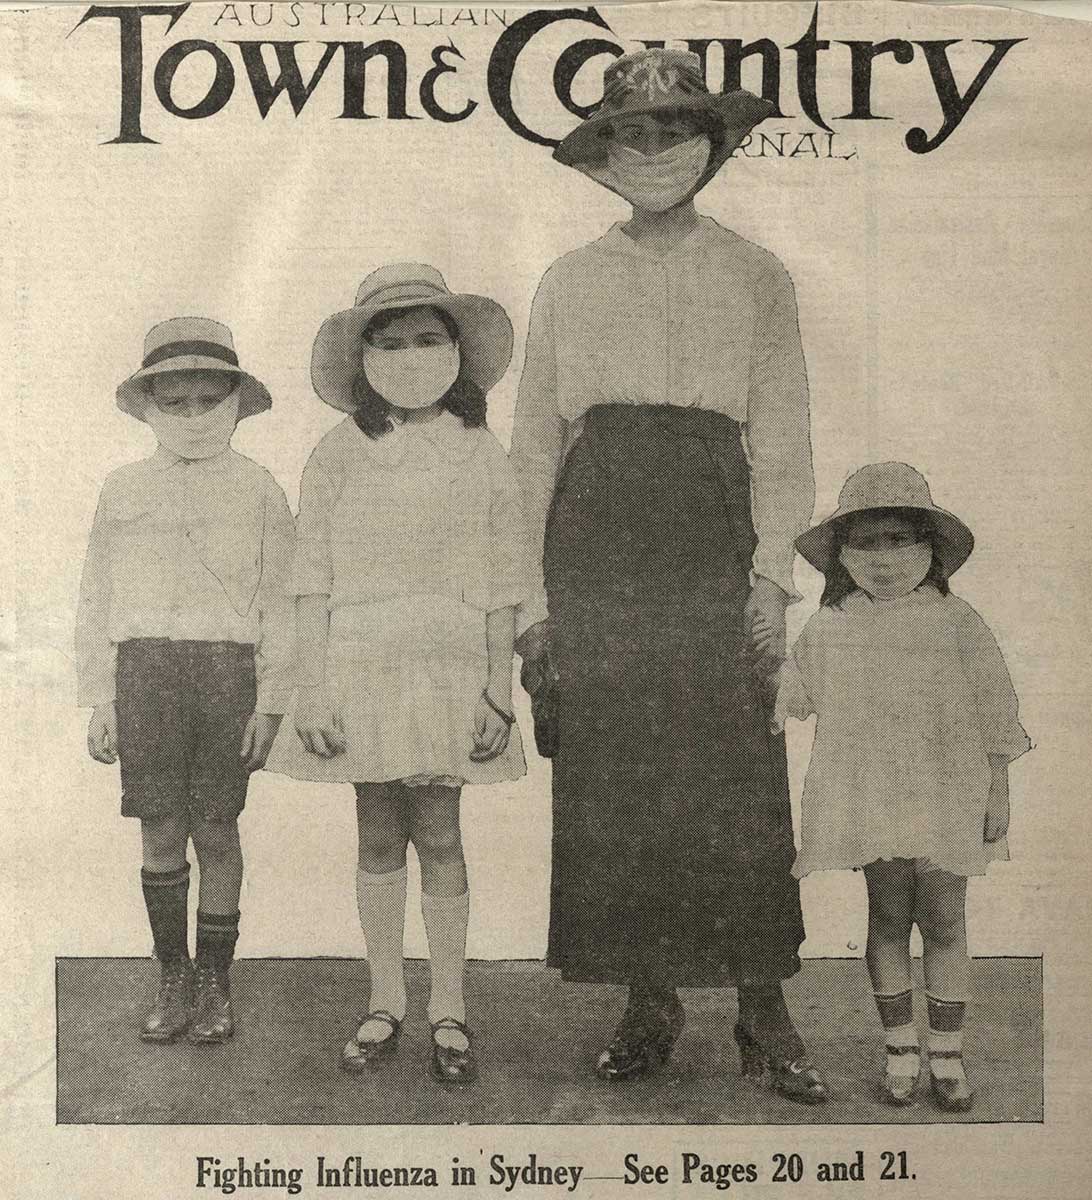 Cover of the Australian Town and Country Journal during the flu pandemic
